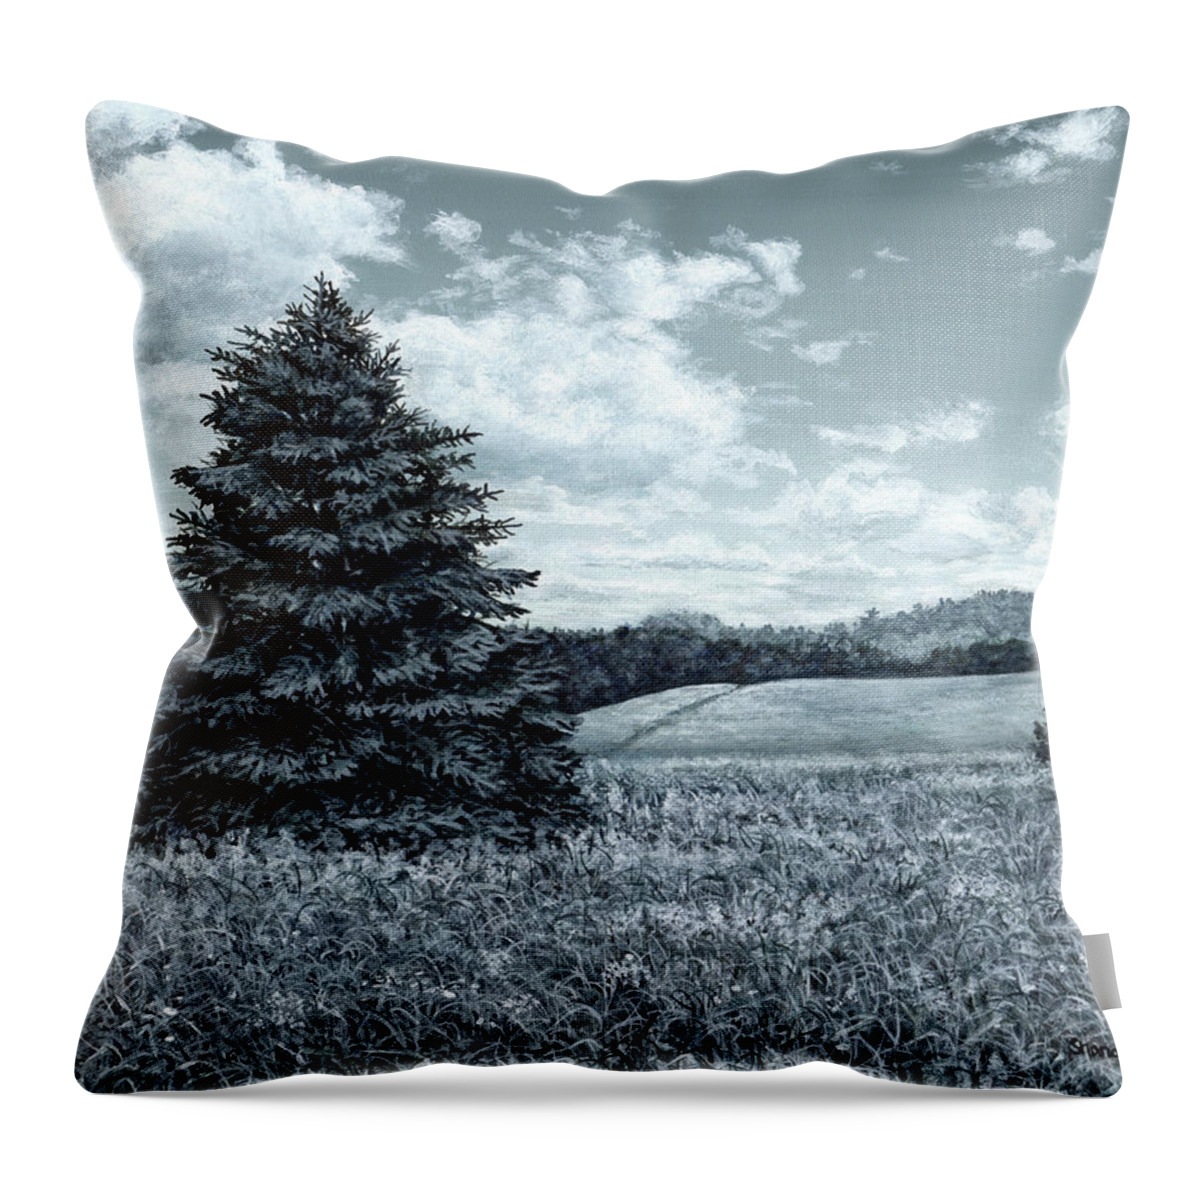 Landscape Throw Pillow featuring the painting Memories of Summer by Shana Rowe Jackson